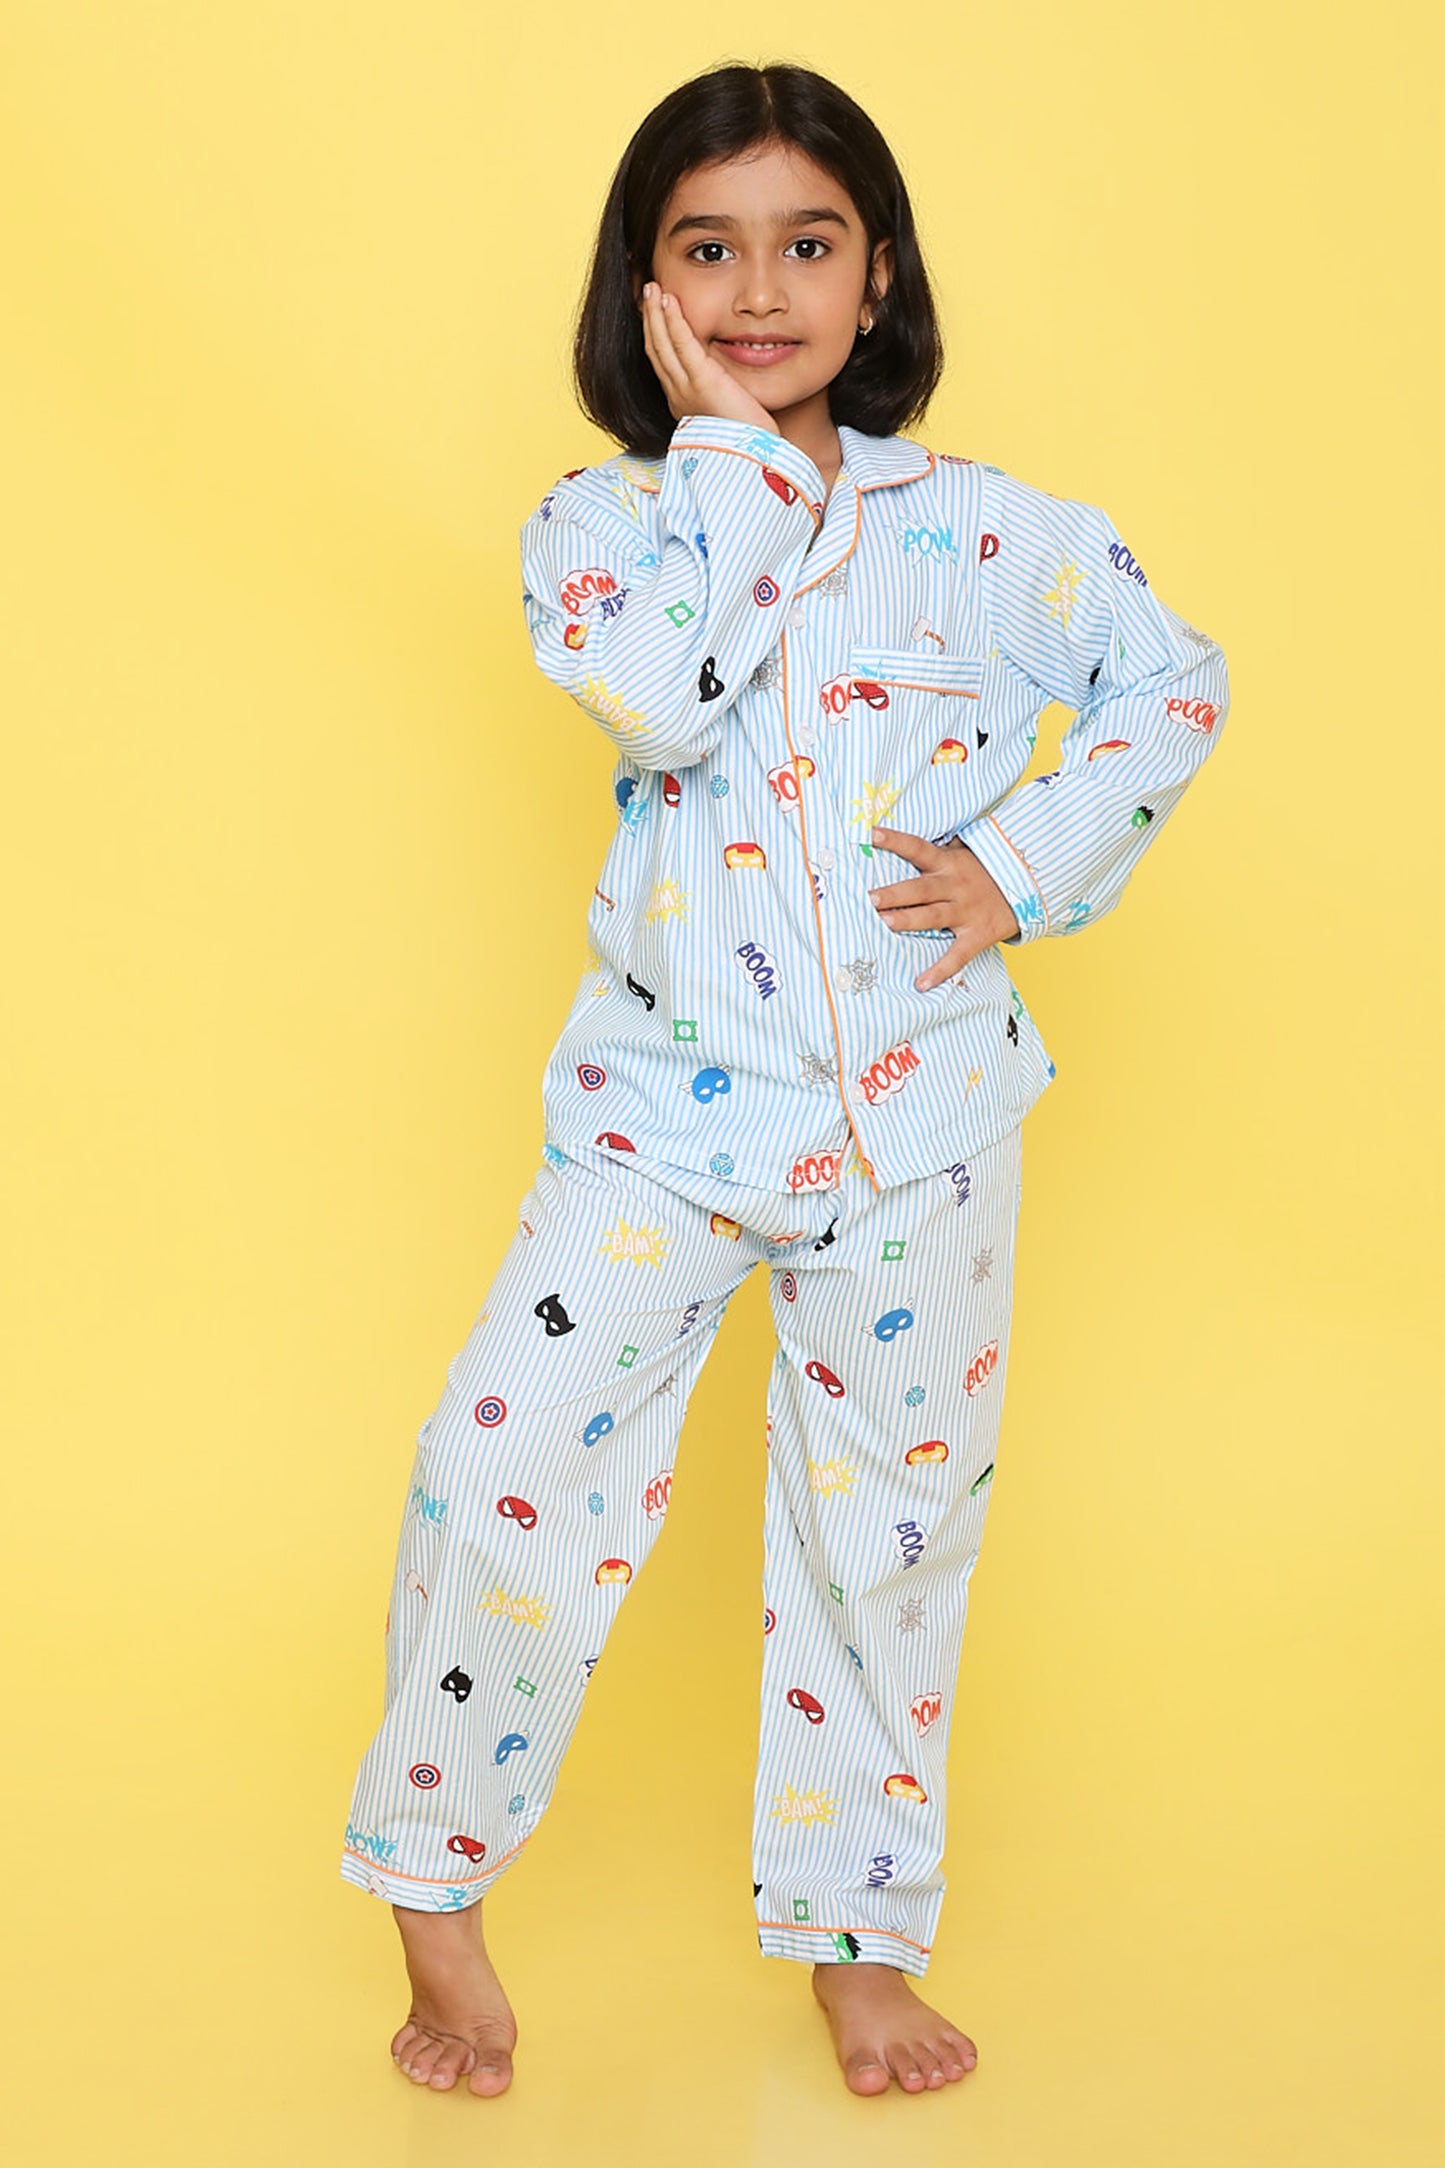 Knitting Doodles Premium cotton Kids' Notched Collar Night suit in Smart Superhero masks themed Print- Blue and white